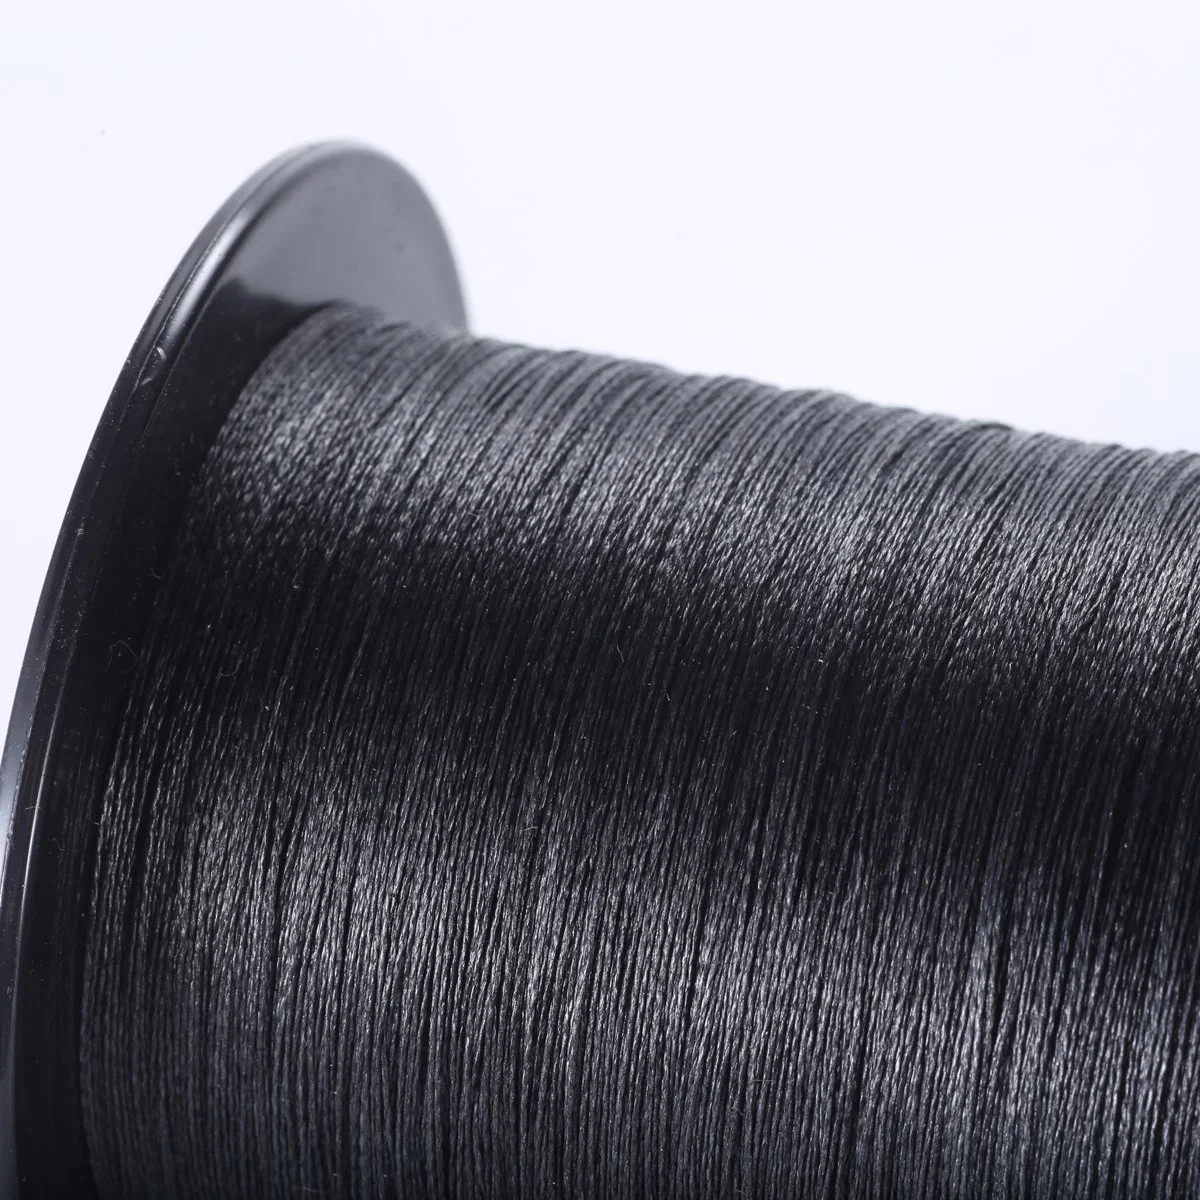 500m High quality/High cost performance  Fishing Line PE High Abrasion Resistance Fishing Accessories